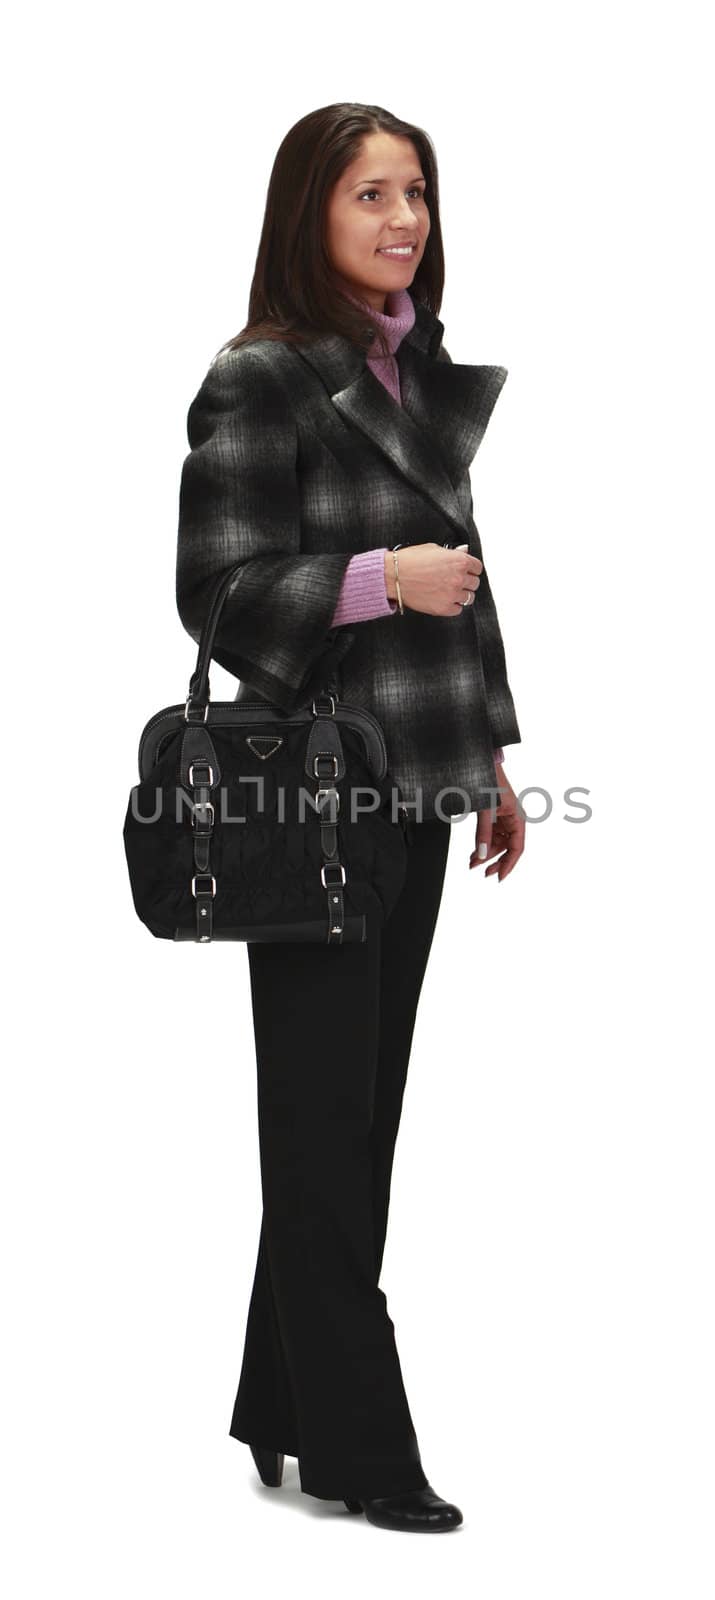 Casually dressed woman with a bag, standing,isolated against a white background.